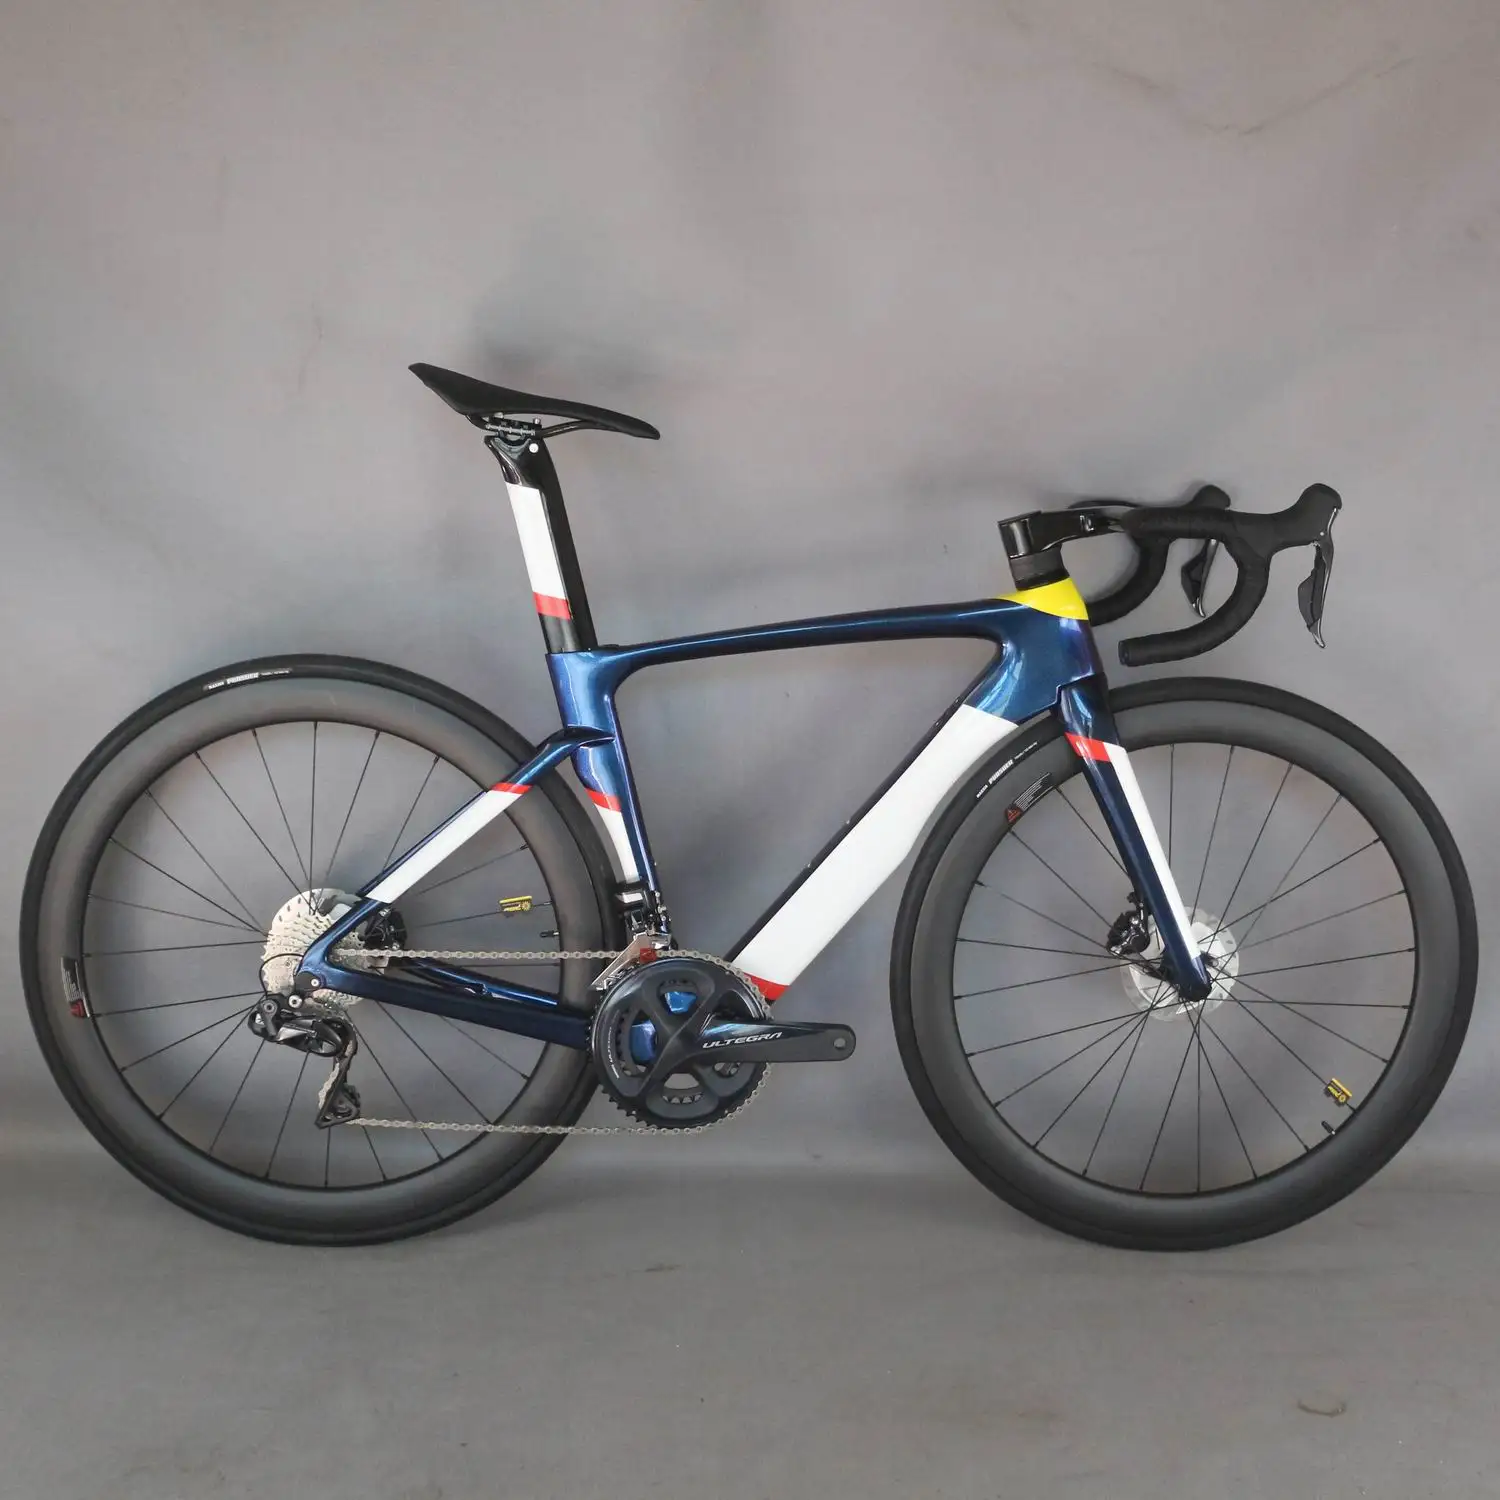 

2022 complete bike All inner cable Disc 22 Speed complete Road Bike TT-X22 with SH1MAN0 R8070 Di2 groupset